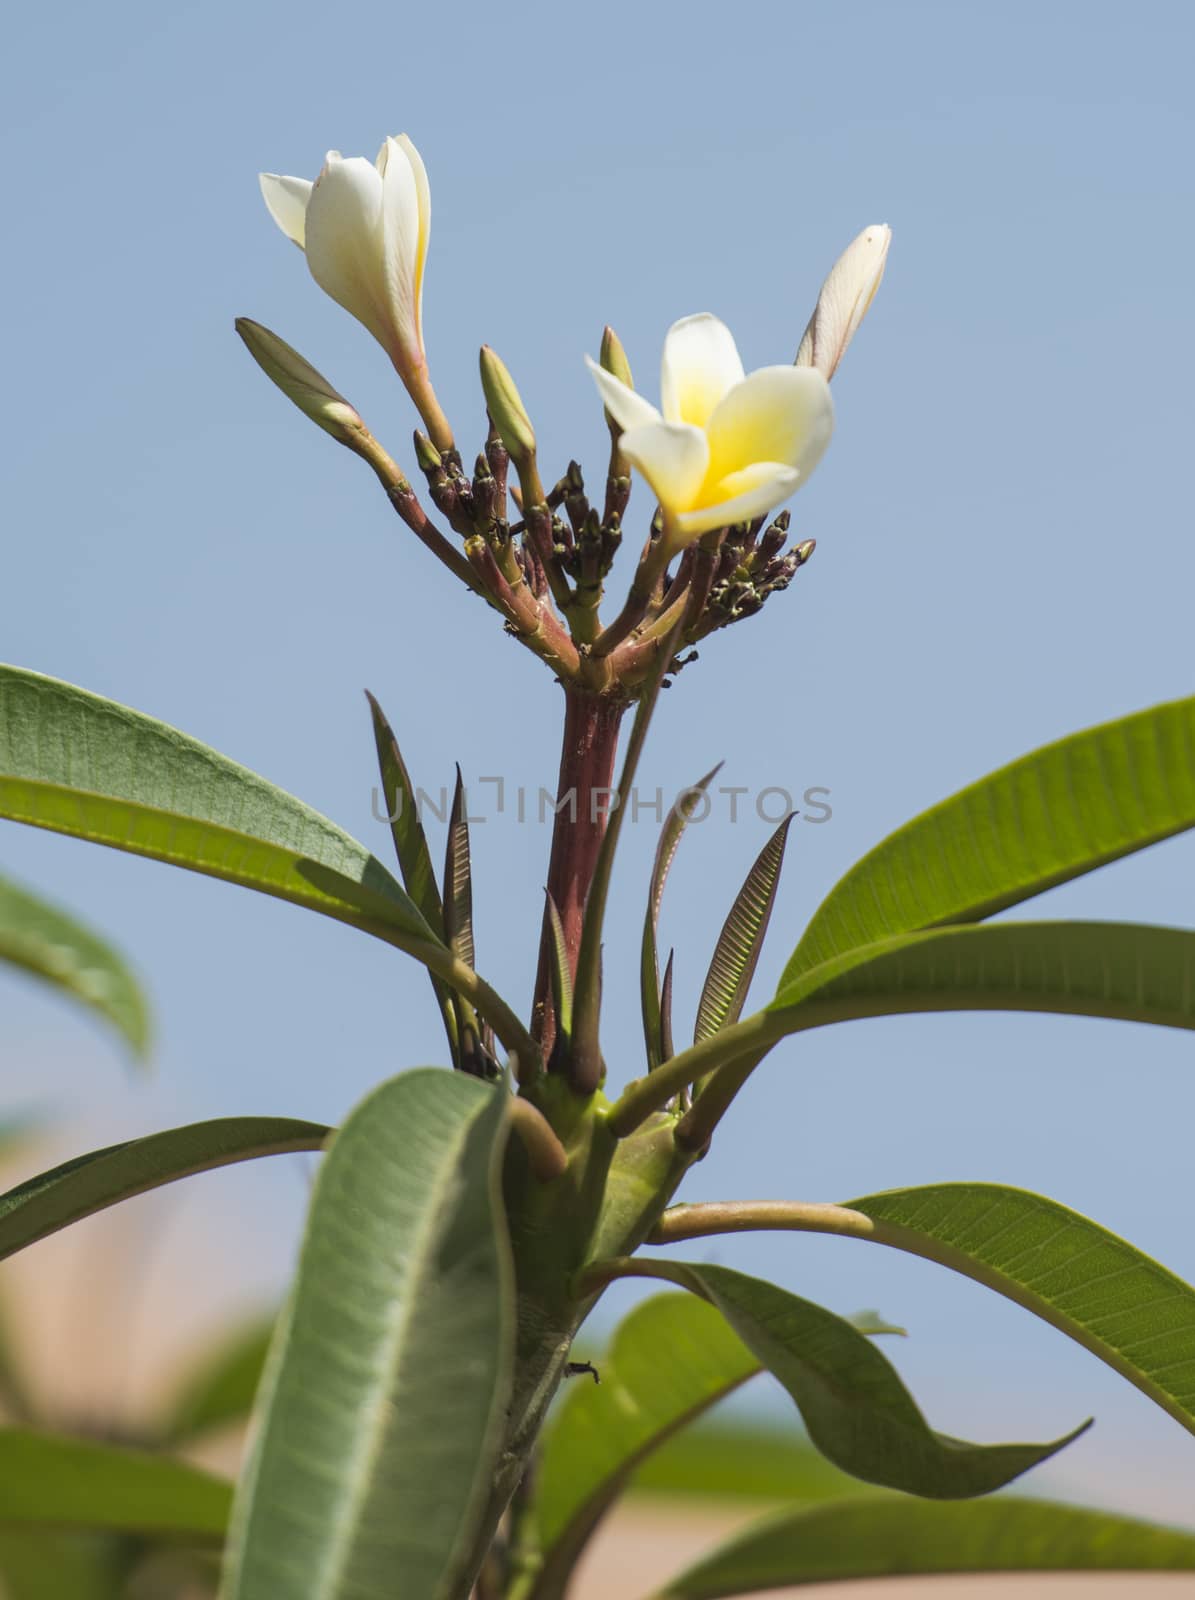 Close-up detail of a frangipani plumeria deciduous ornamental plant shrub in garden with white flowers